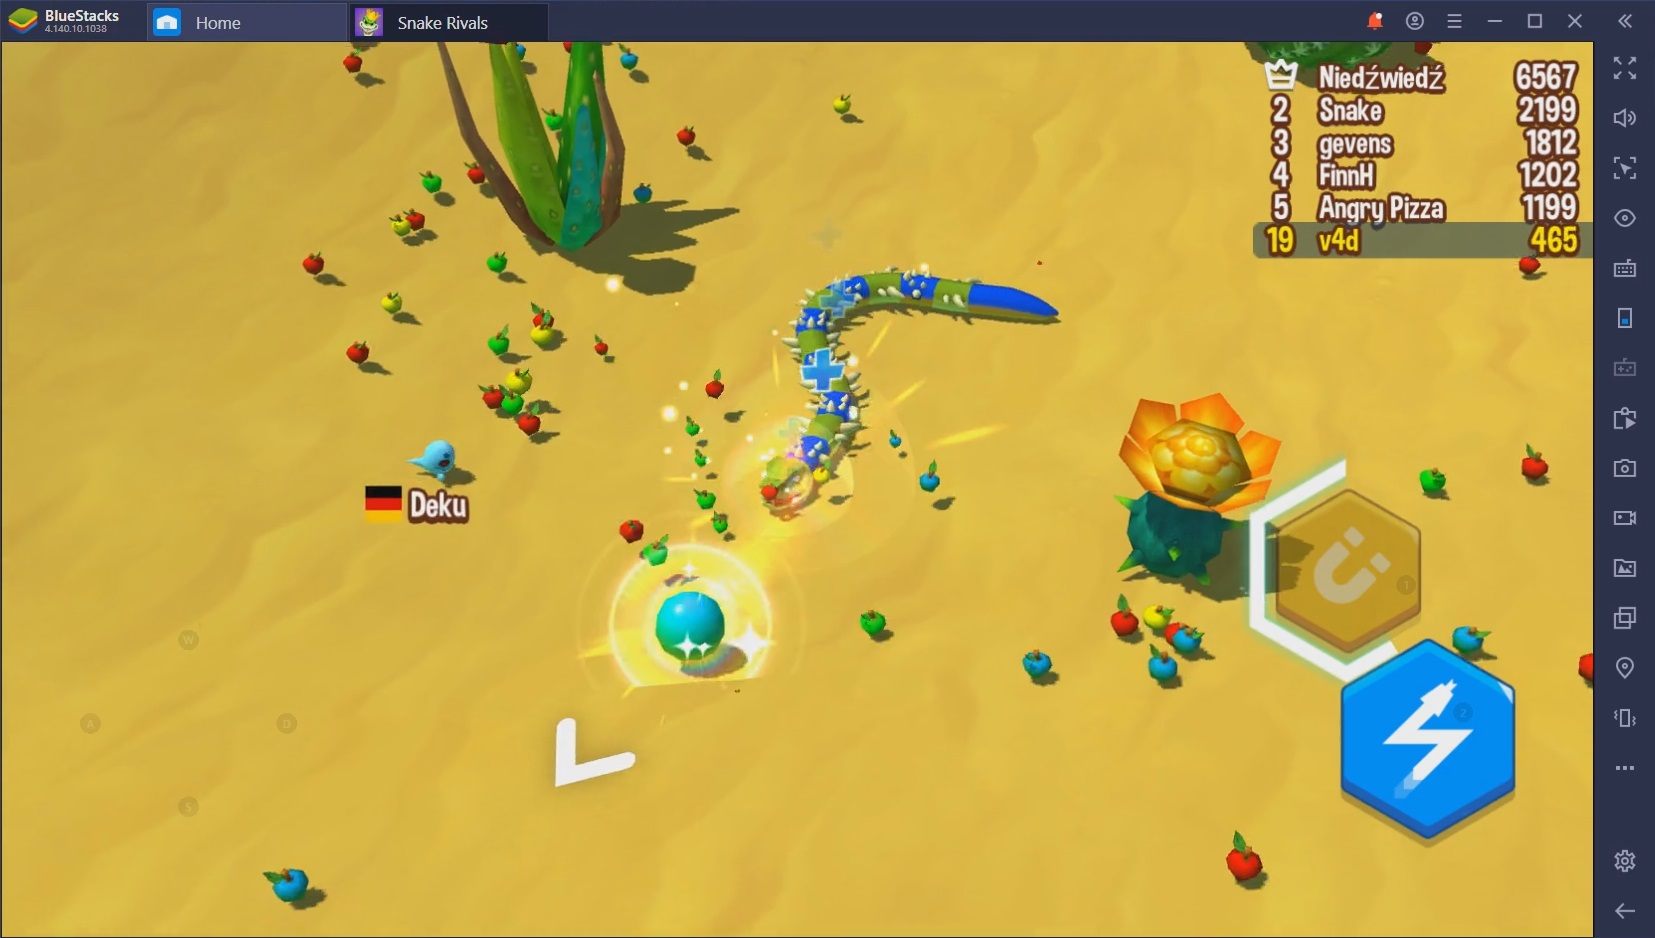 Play Snake Rivals on PC on PC with BlueStacks